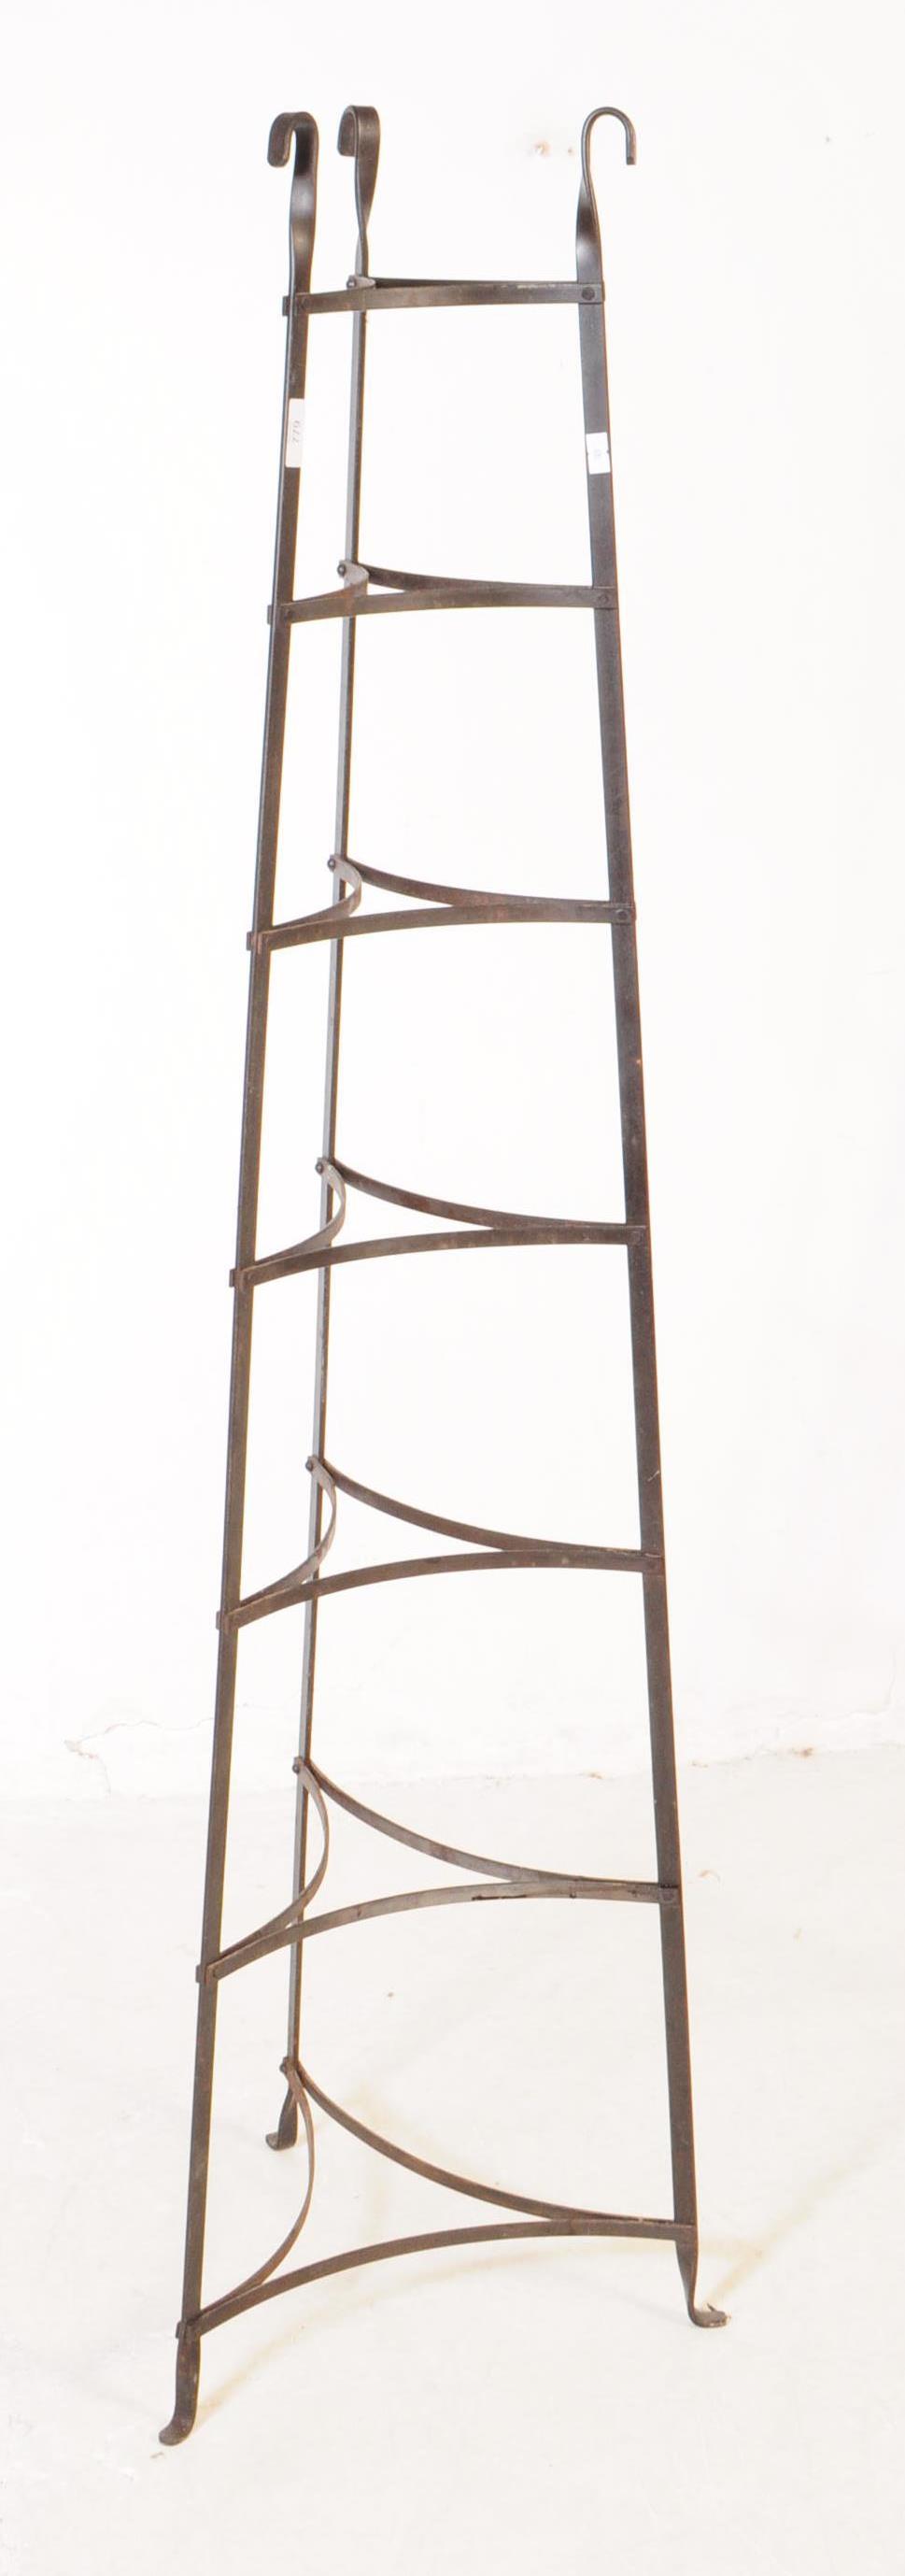 VINTAGE 20TH CENTURY WROUGHT IRON SEVEN TIER PLANT STAND